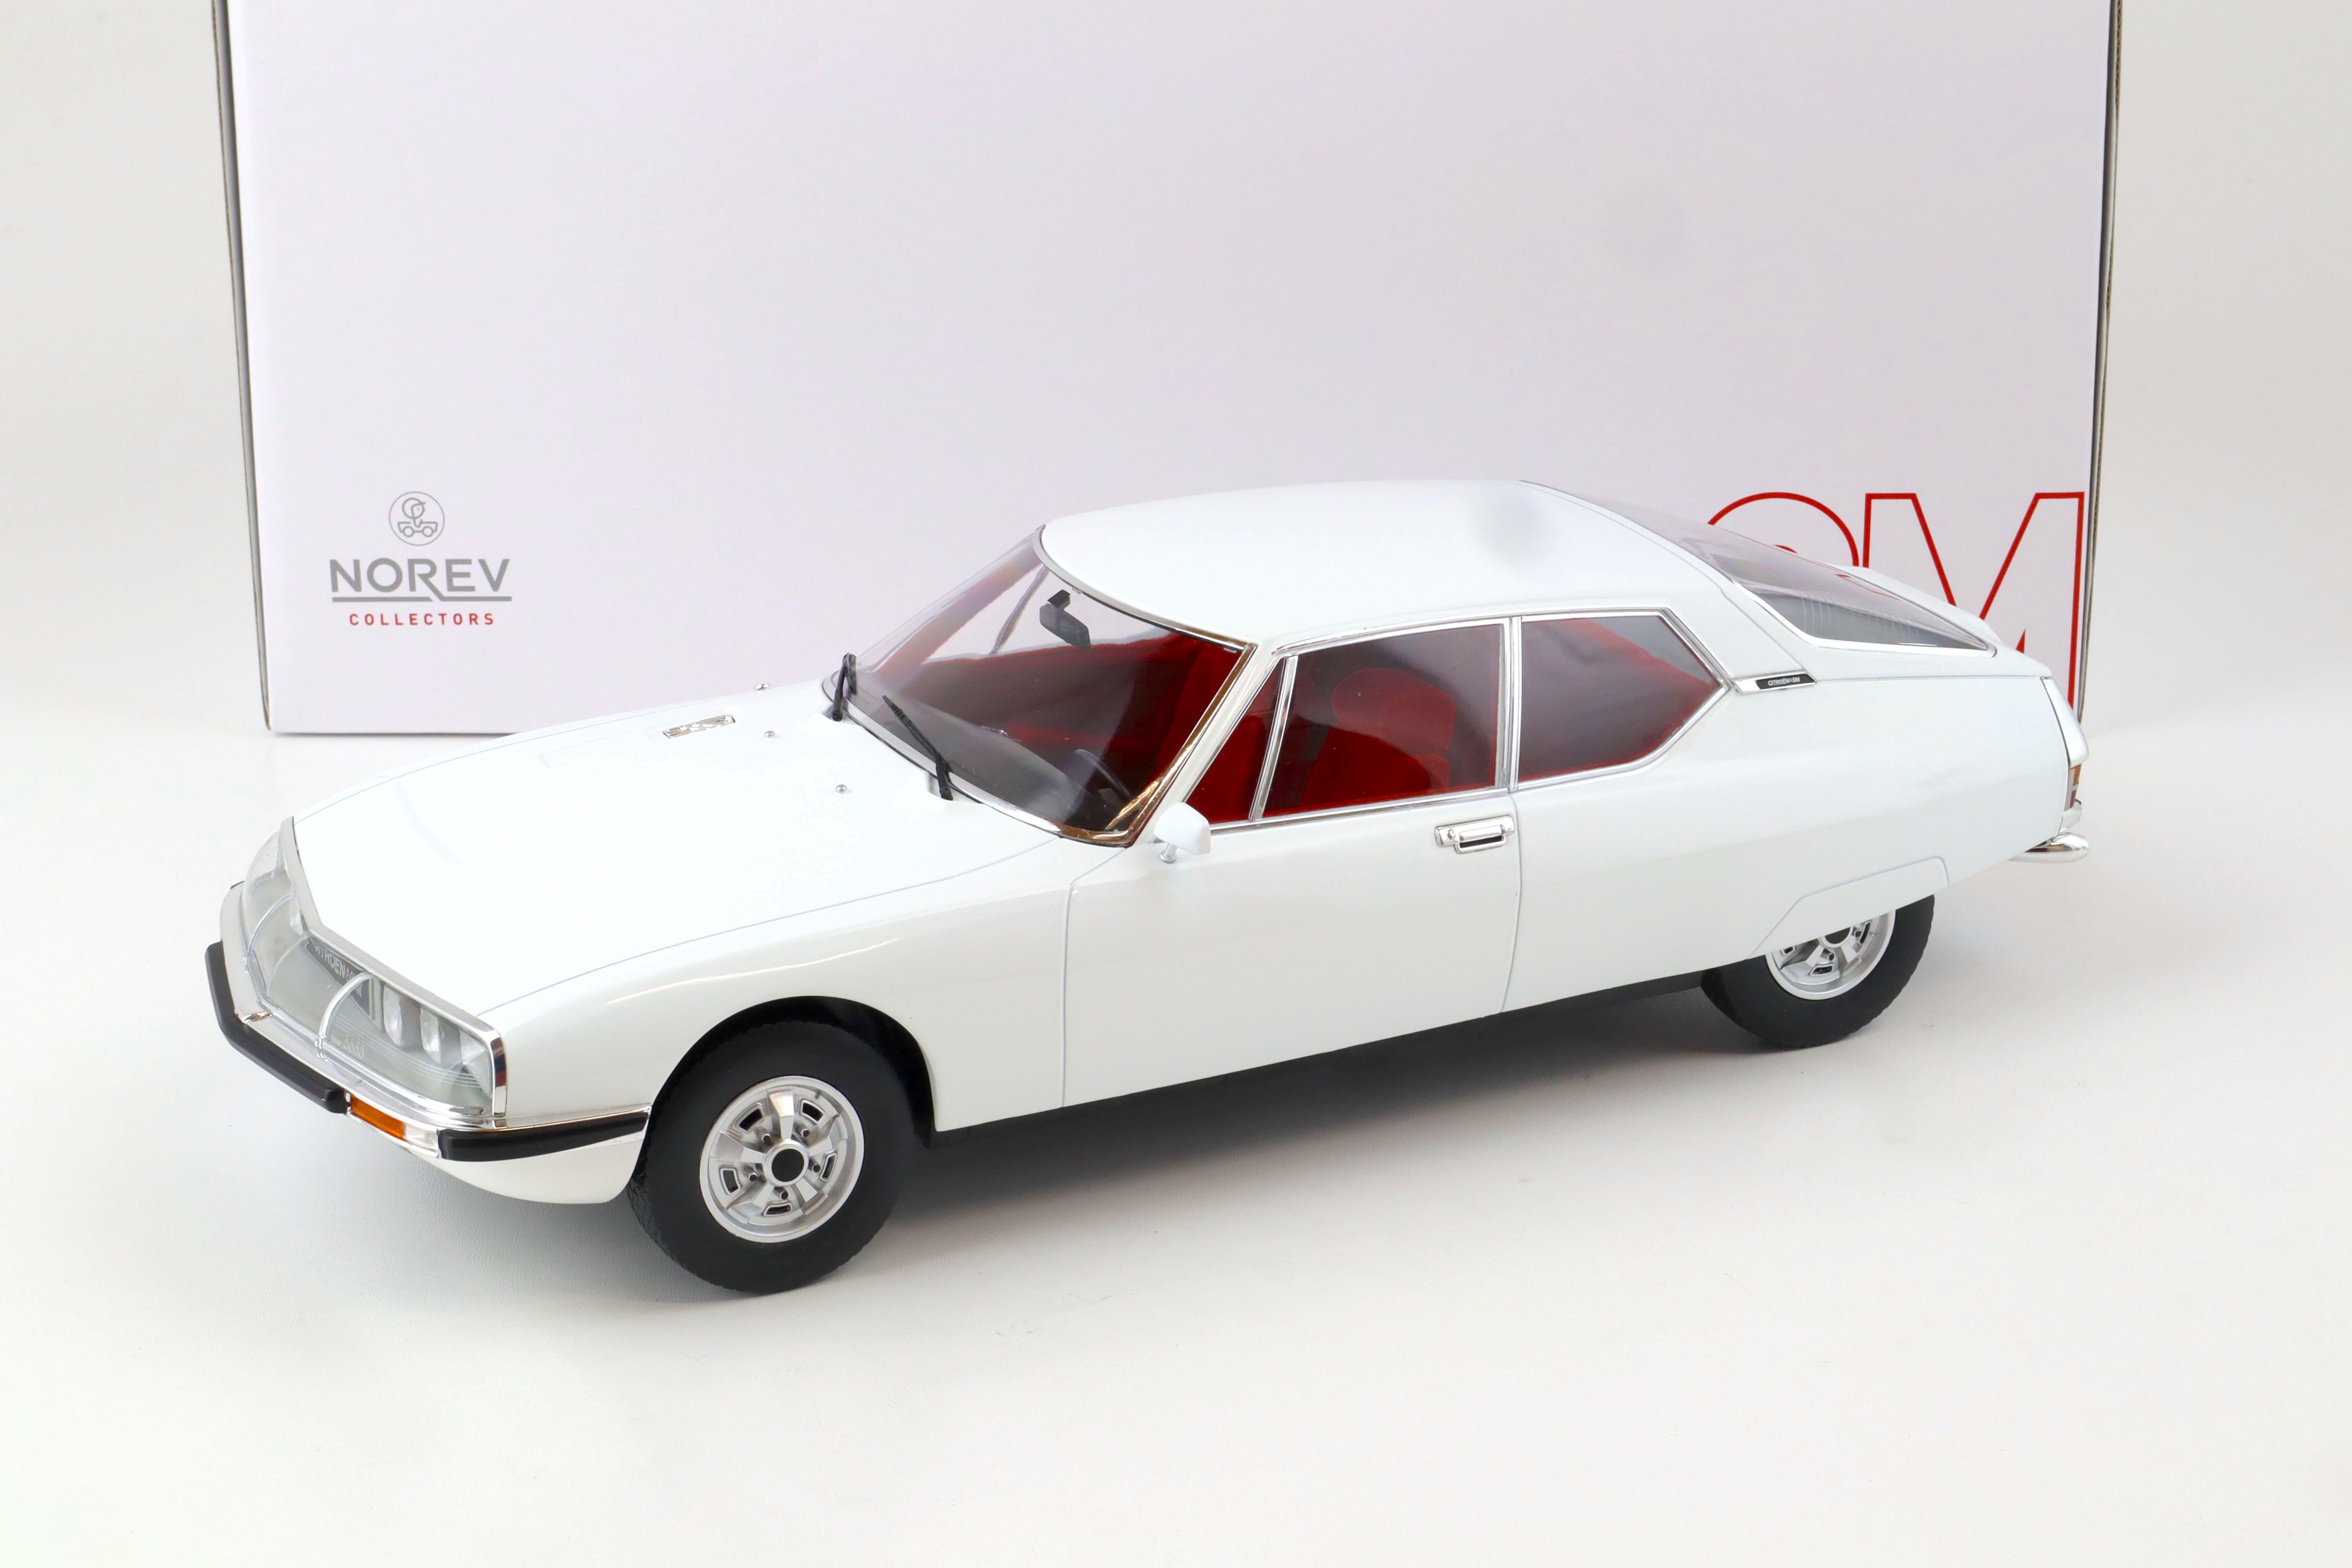 1:12 Norev Citroen SM 1974 white with red interior 121702 - Limited 200 pcs.